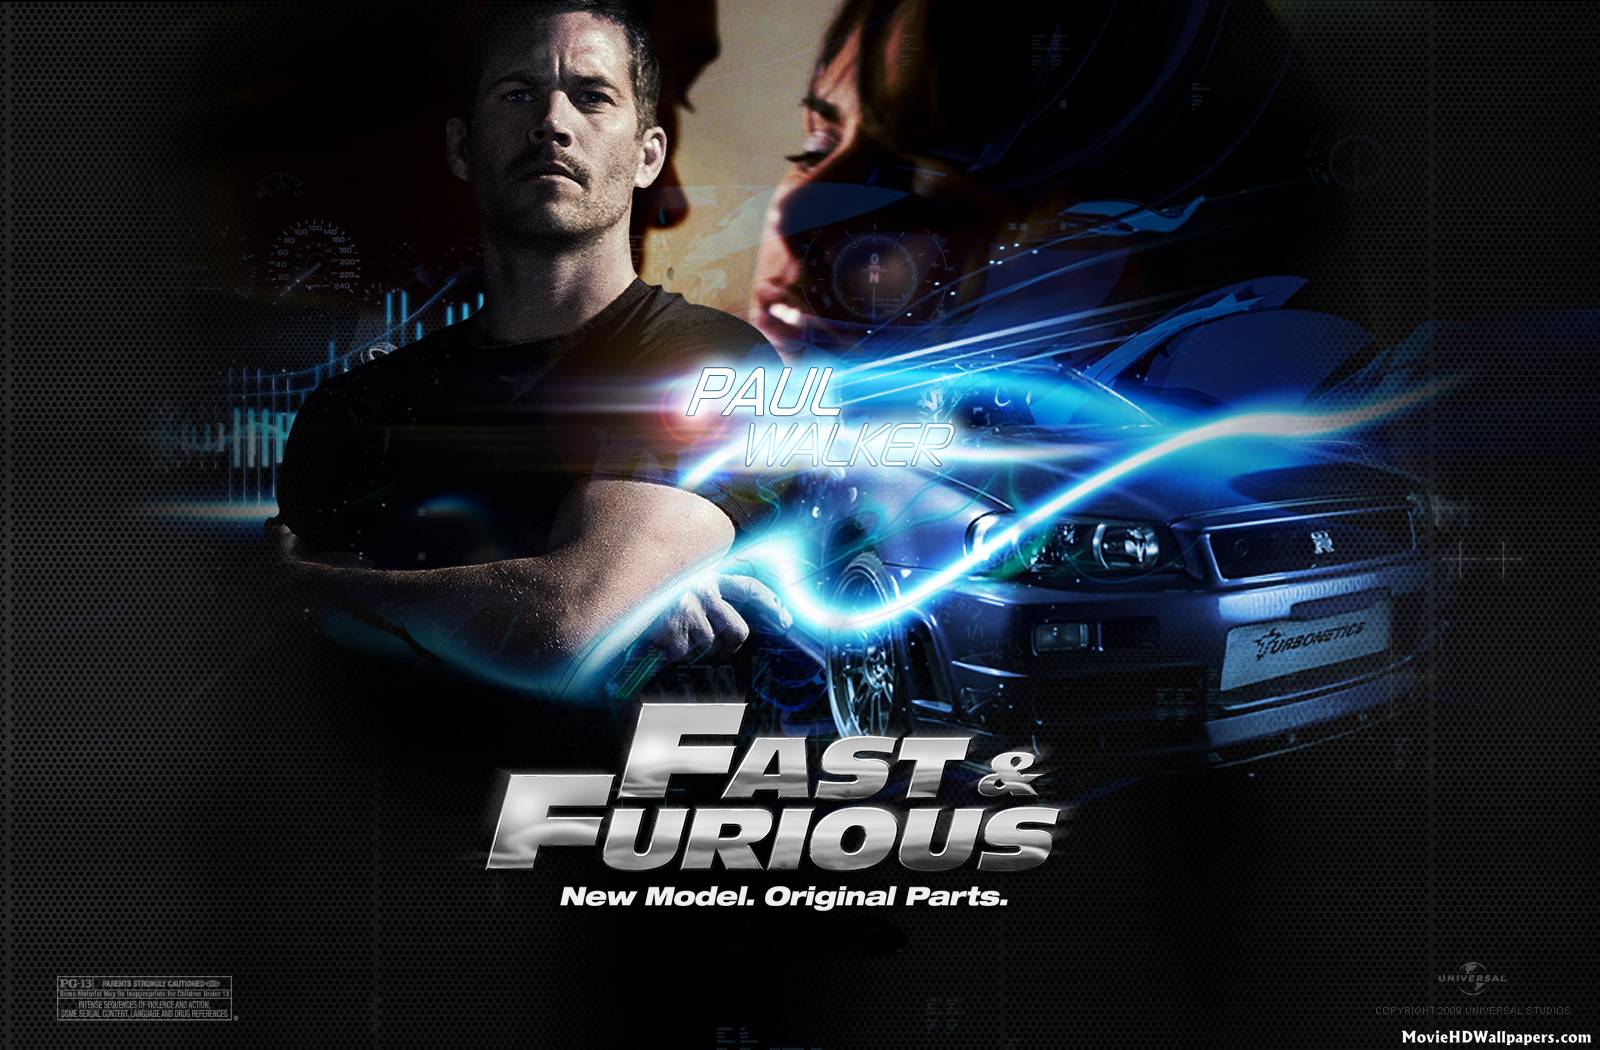 Fast and Furious 7 Wallpaper. Free Internet Picture